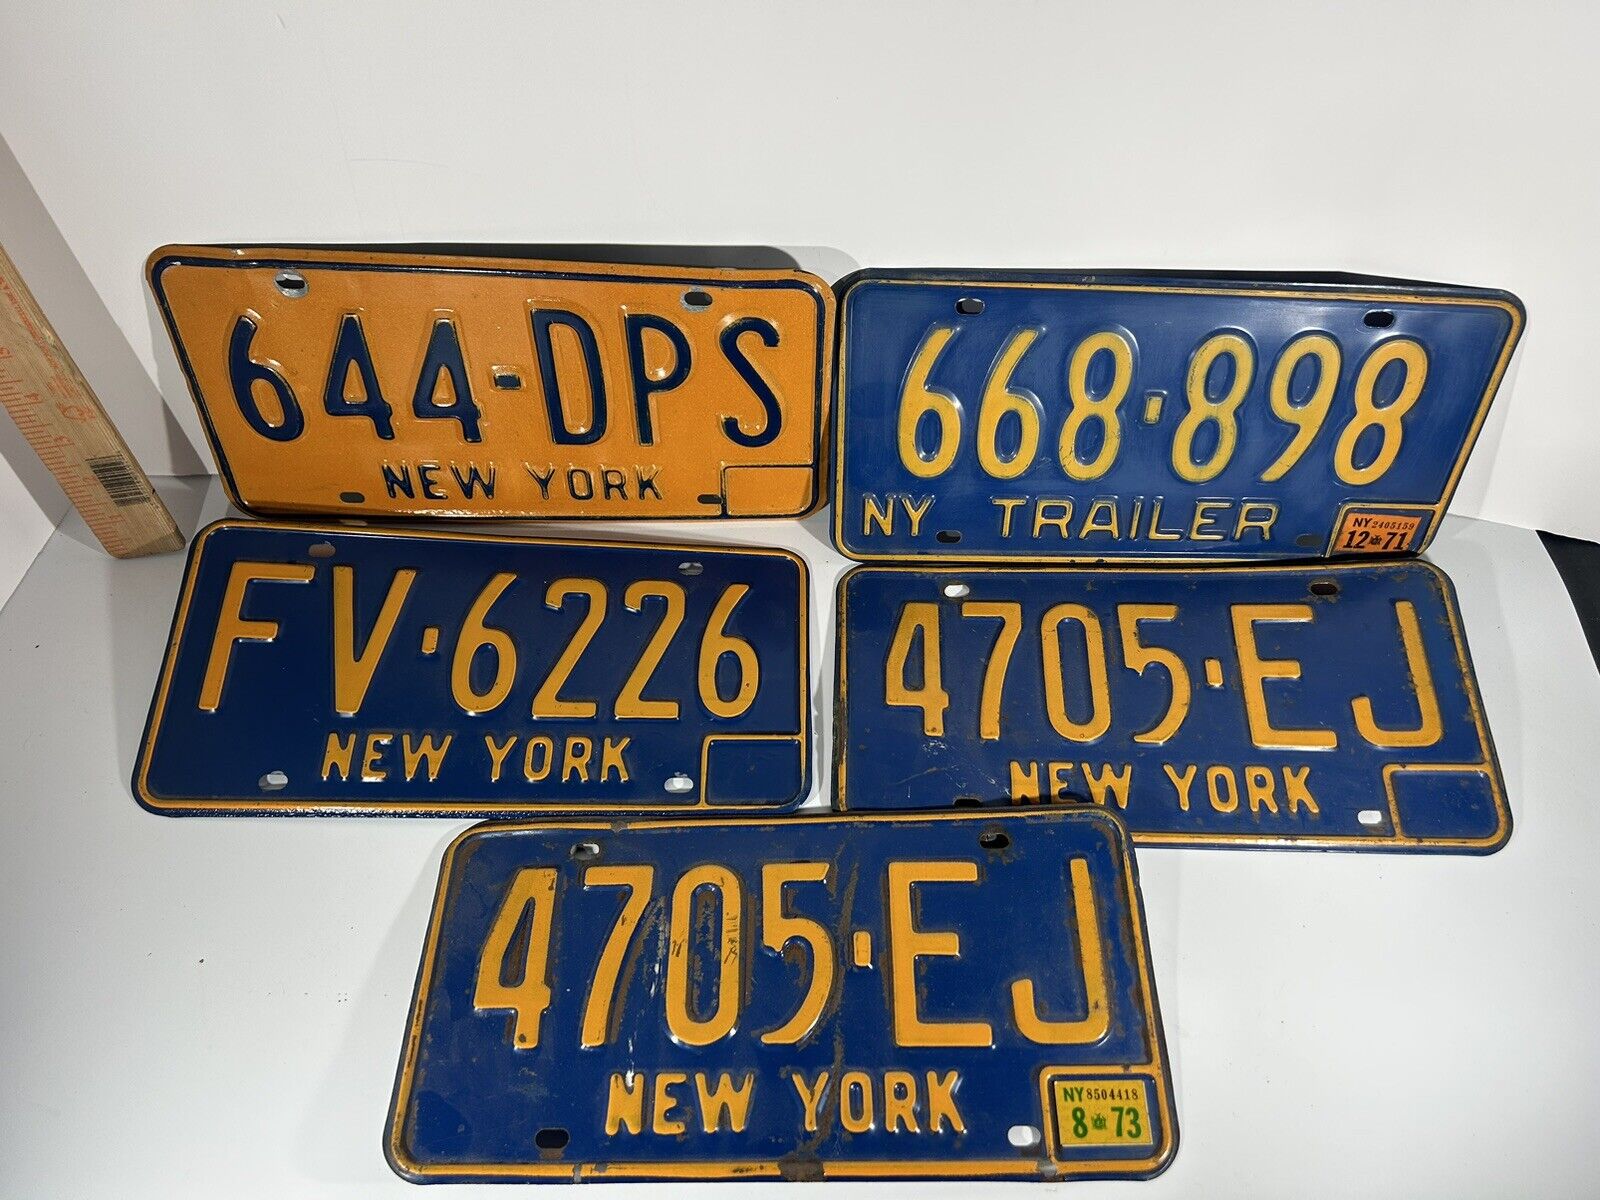 1973 NEW YORK License Plate Lot Of 5 - 1966-73 Series